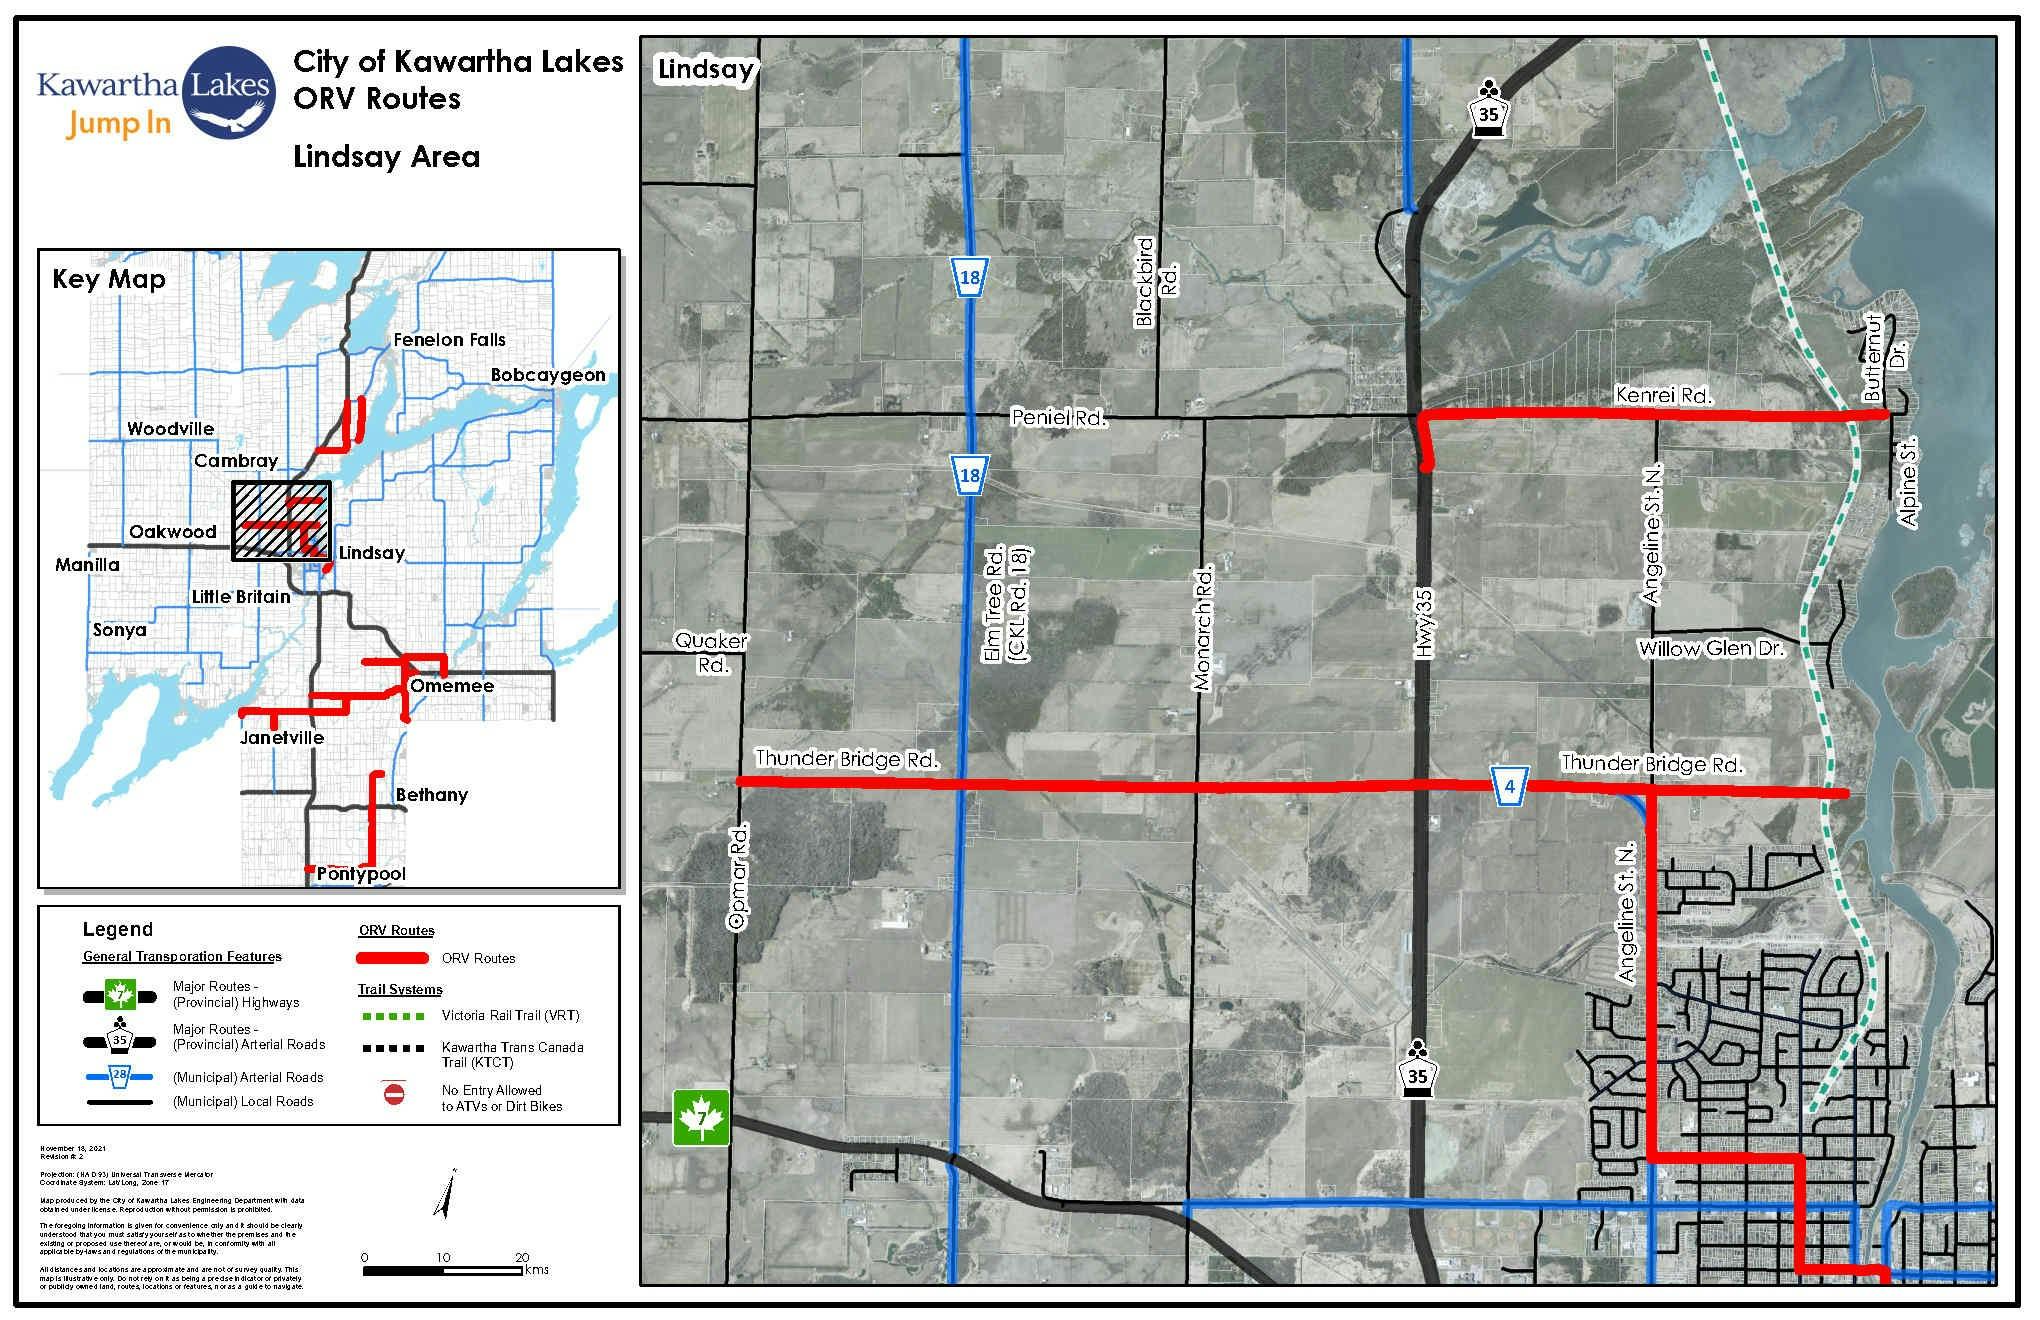 Approved Route Lindsay area.jpg